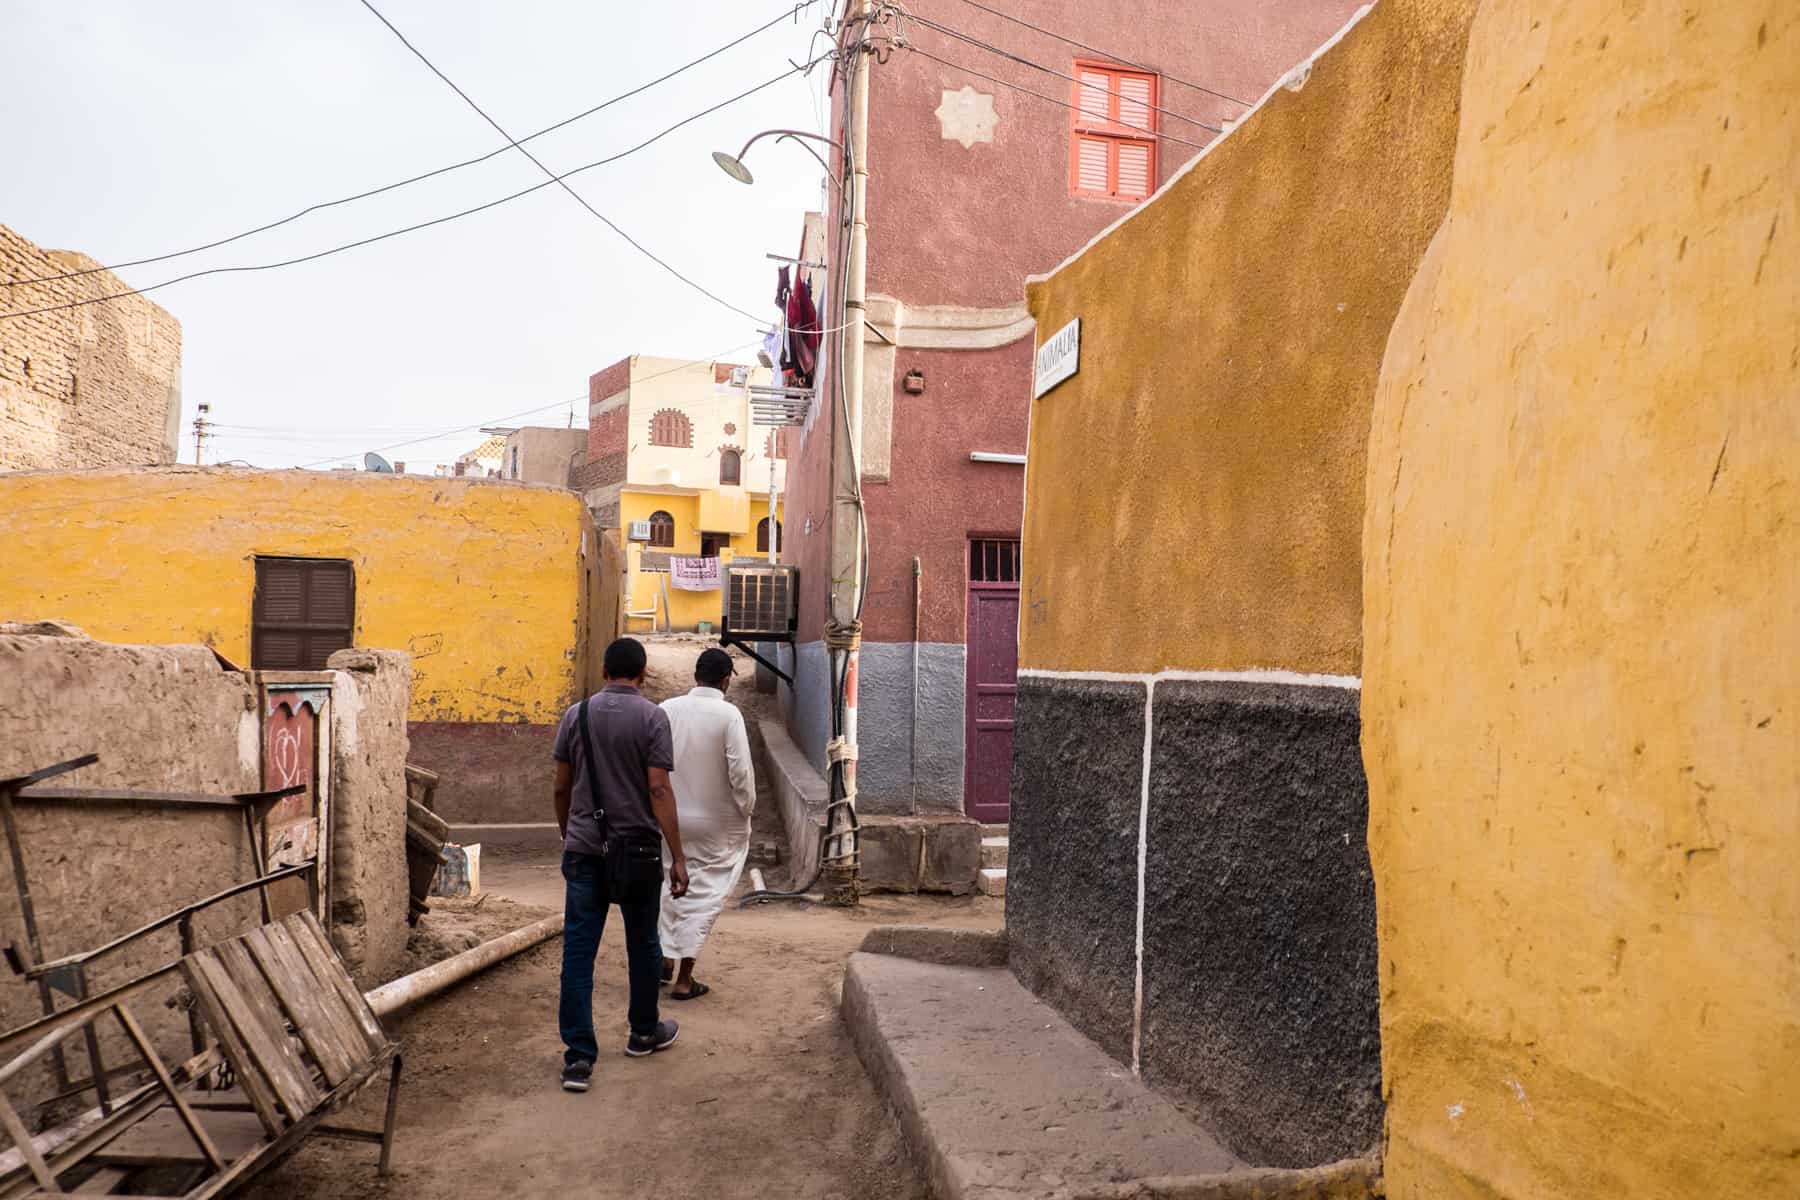 An Egyptian guide and Nubian man walk through the pink and yellow painted walls of a traditional Nubian village in Aswan, Egypt